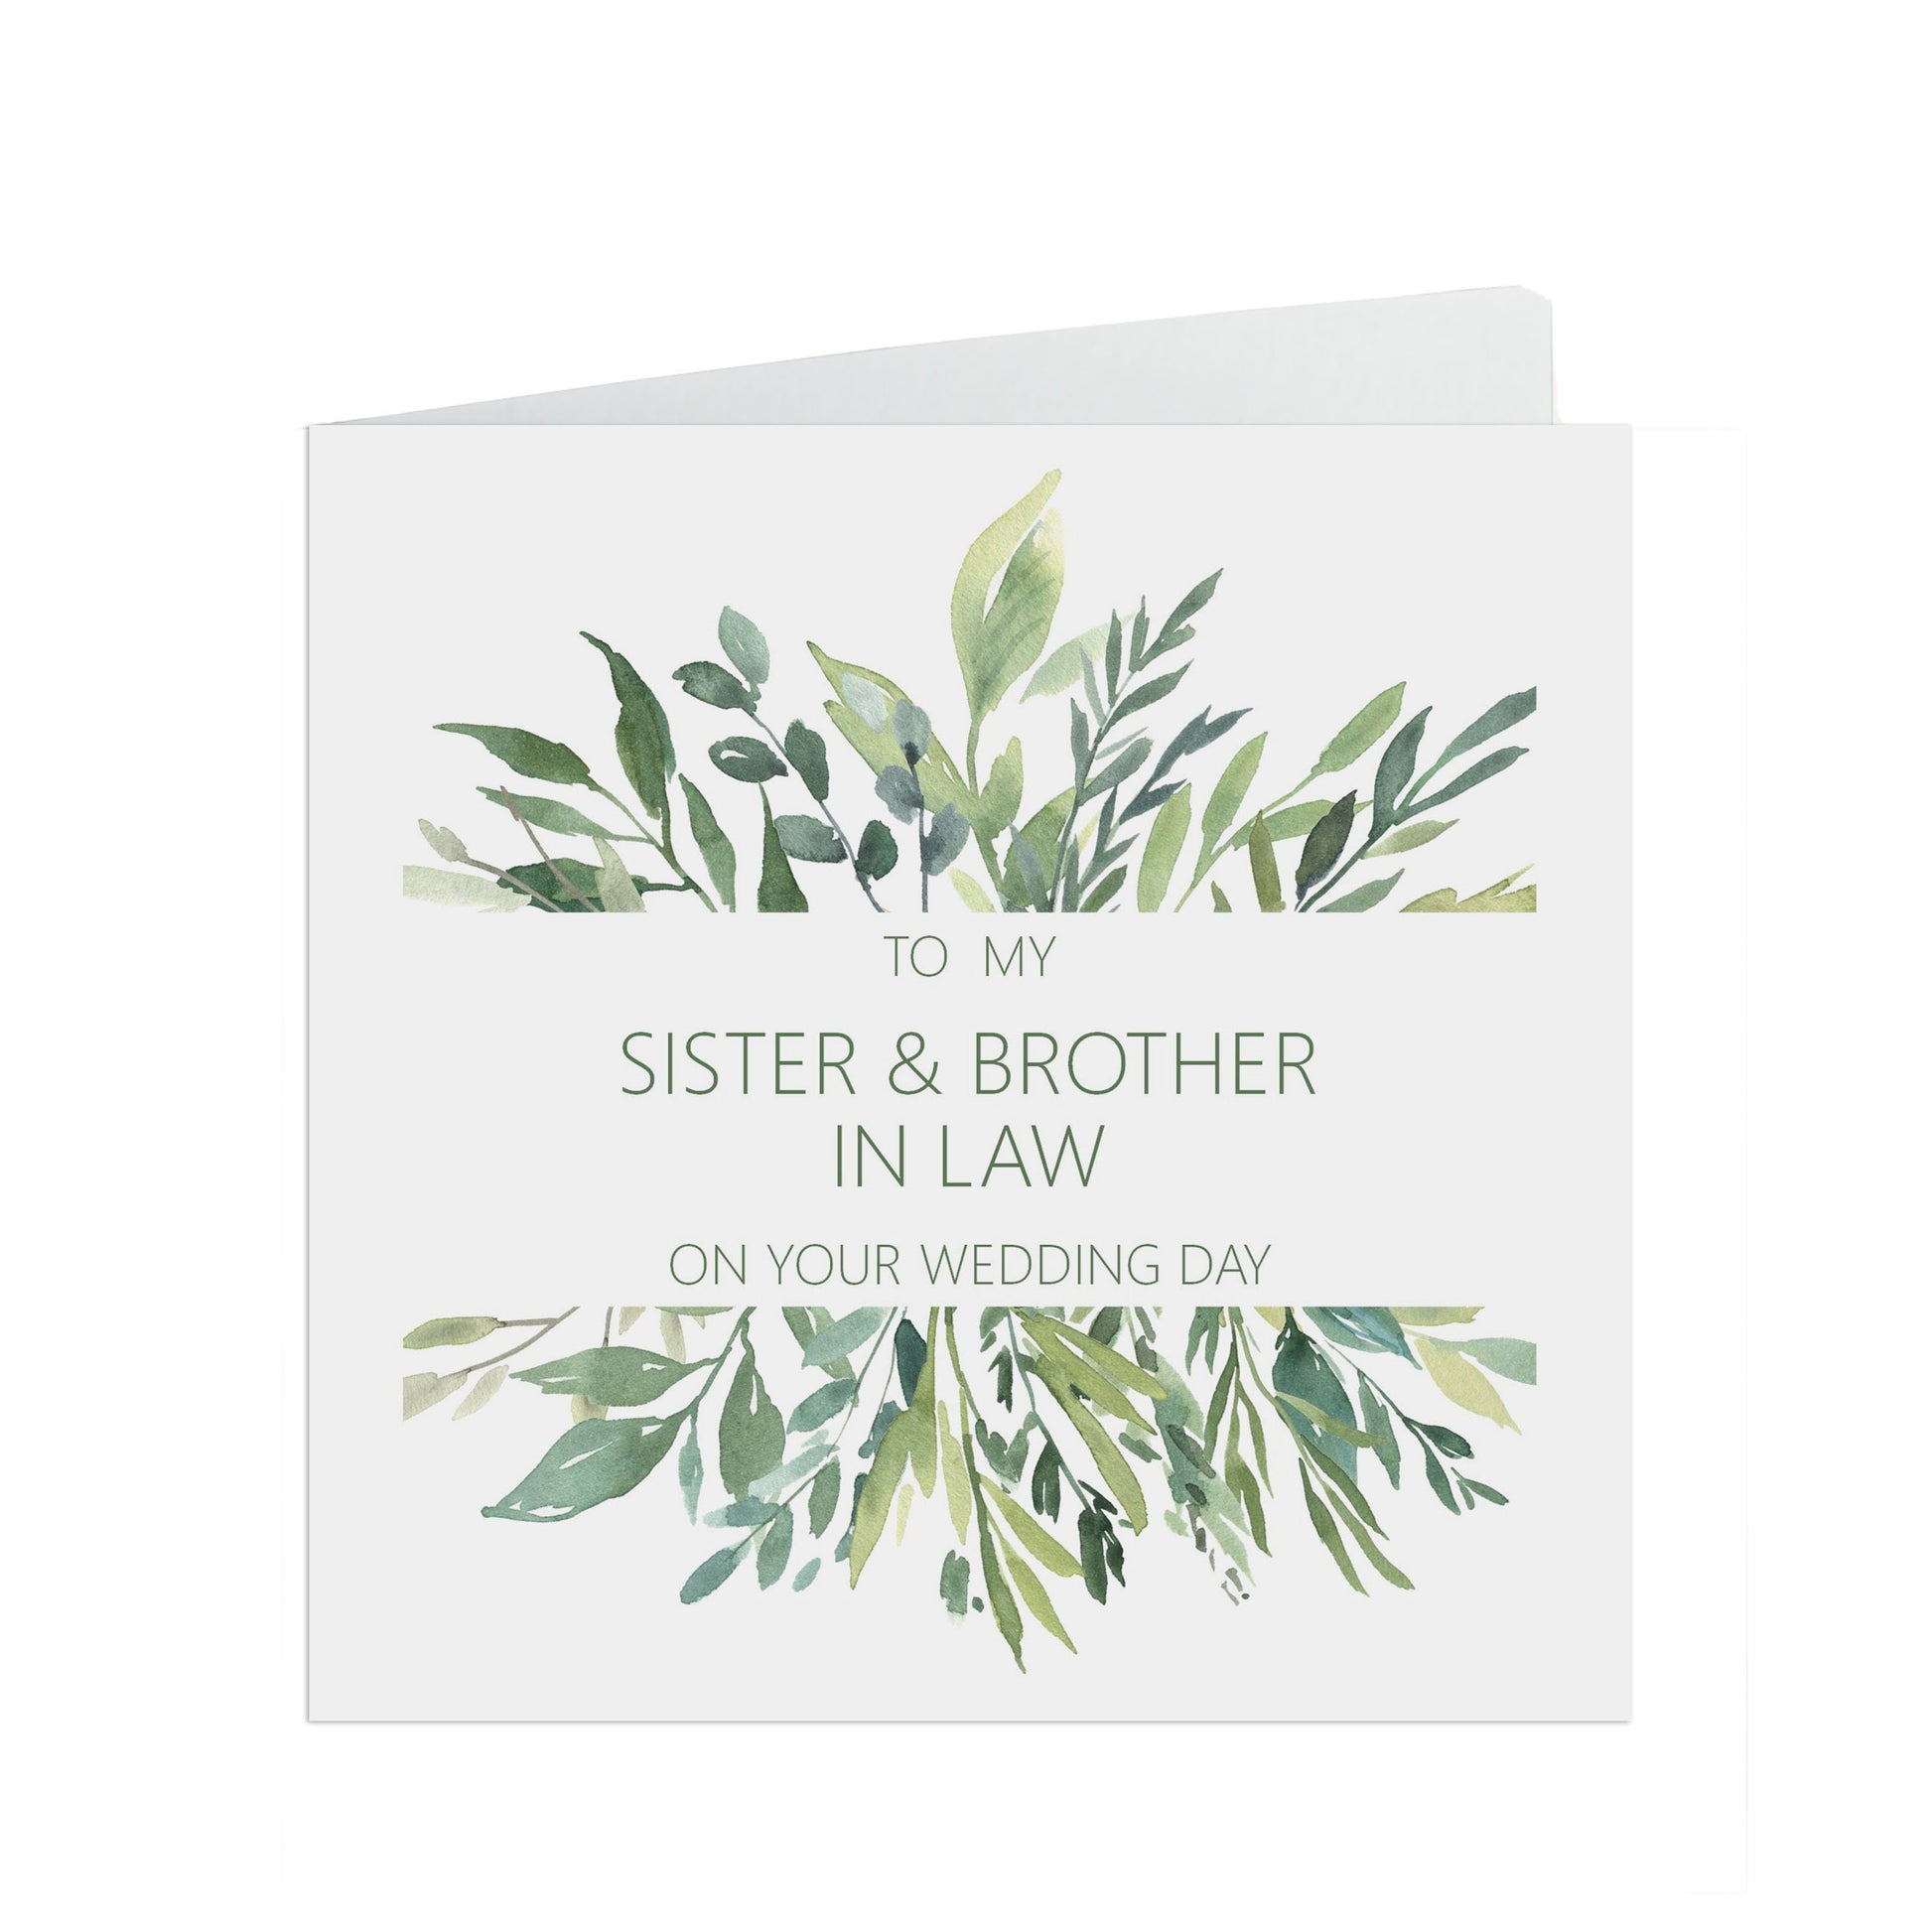 Sister & Brother In Law On Your Wedding Day Card, Greenery 6x6 Inches With A Kraft Envelope